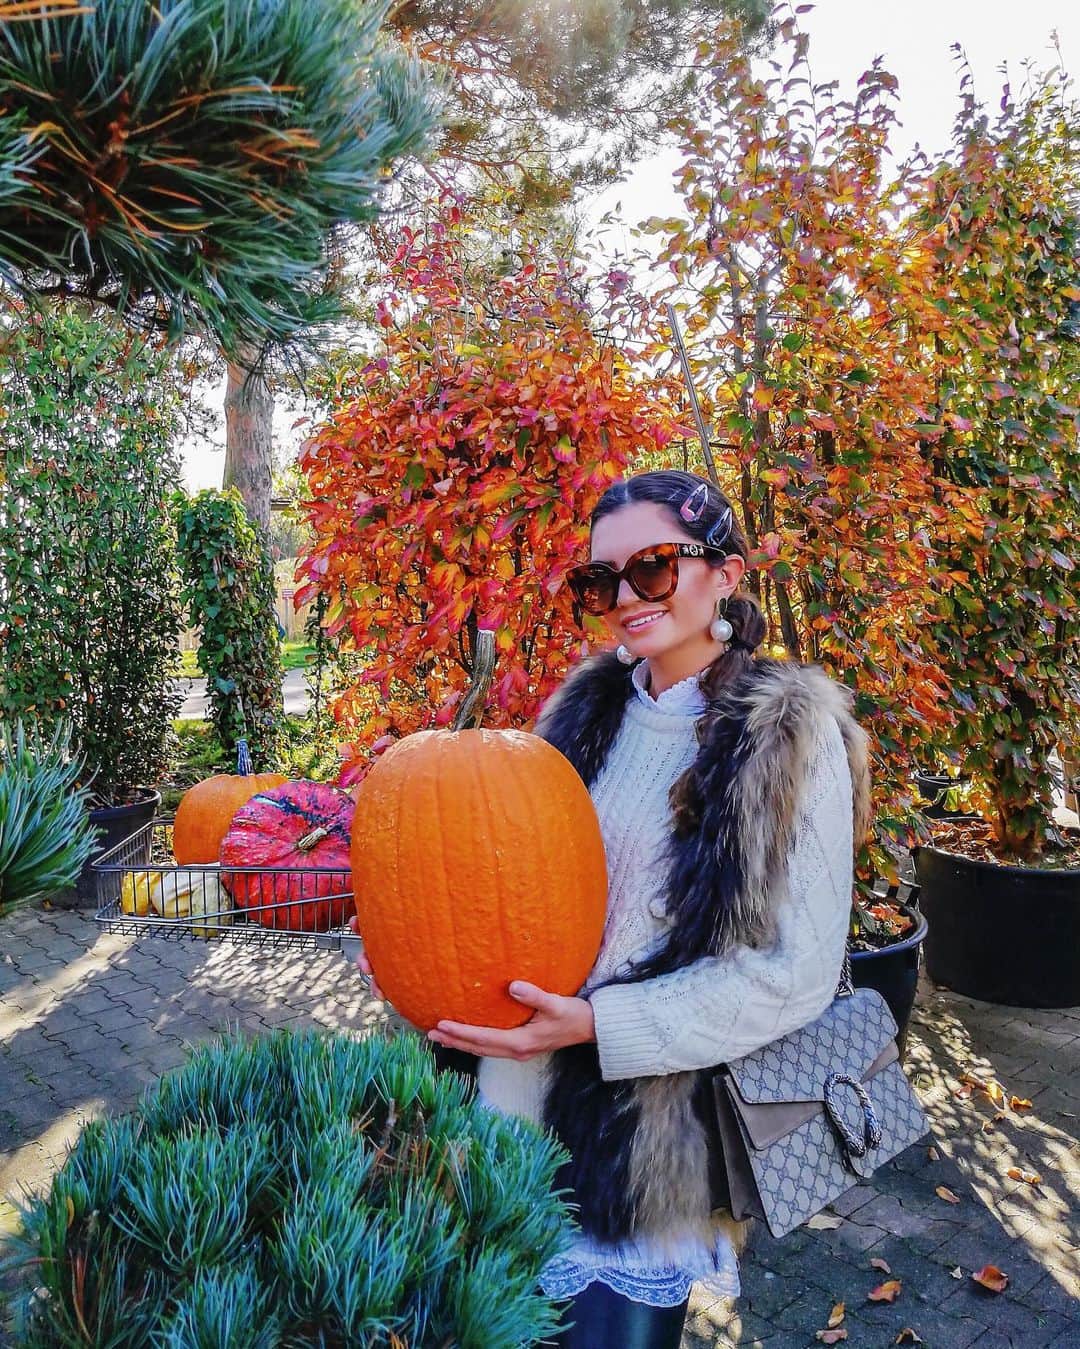 Anniのインスタグラム：「„October is my excuse for pumkin everything ....“ 🤷🏻‍♀️🎃🍂🍁❤️✨ #fallvibes ——————————————————————————— • • • • •  #outfit #fashion #fashionblogger #ootd  #shopbop #fashionblogger_de #blogger #inspiration #inspo #girl #me #look #ig #kissinfashion #americanstyle #stuttgart #liketkit #germany #naturelover #gucci #fall #herbst #pumkins #halloween」